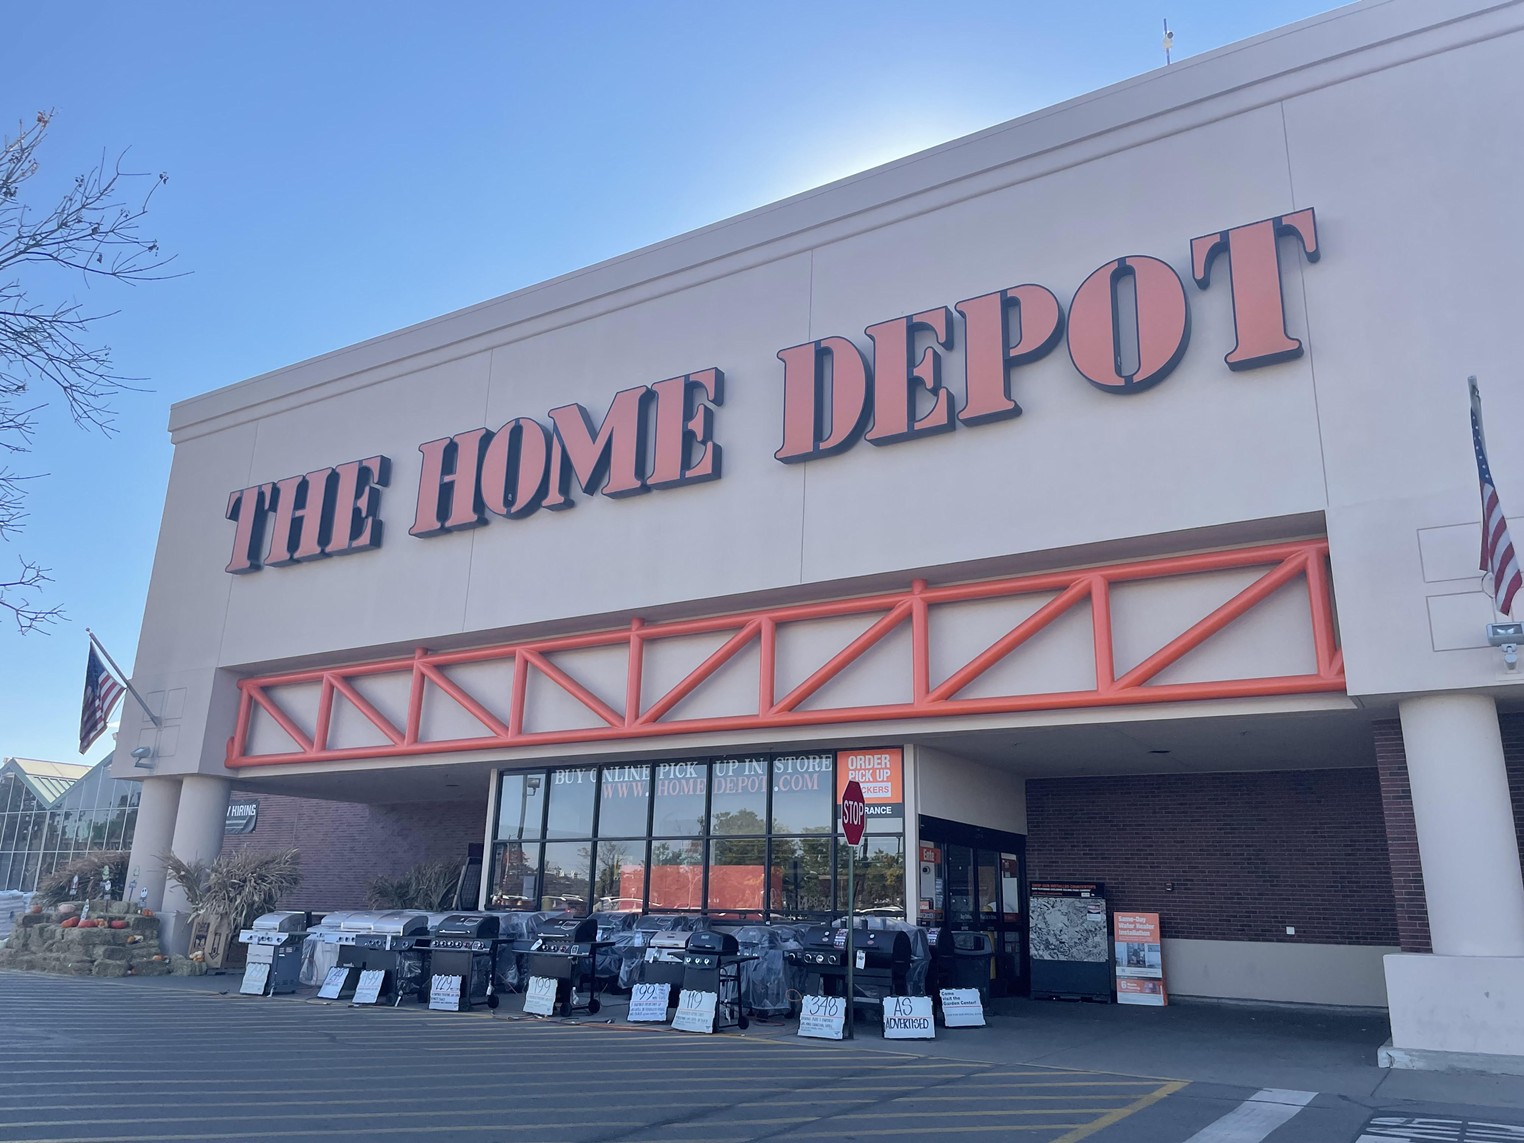 Hot Dog Stand Owners Told to Remove Equipment From Home Depot | Westword